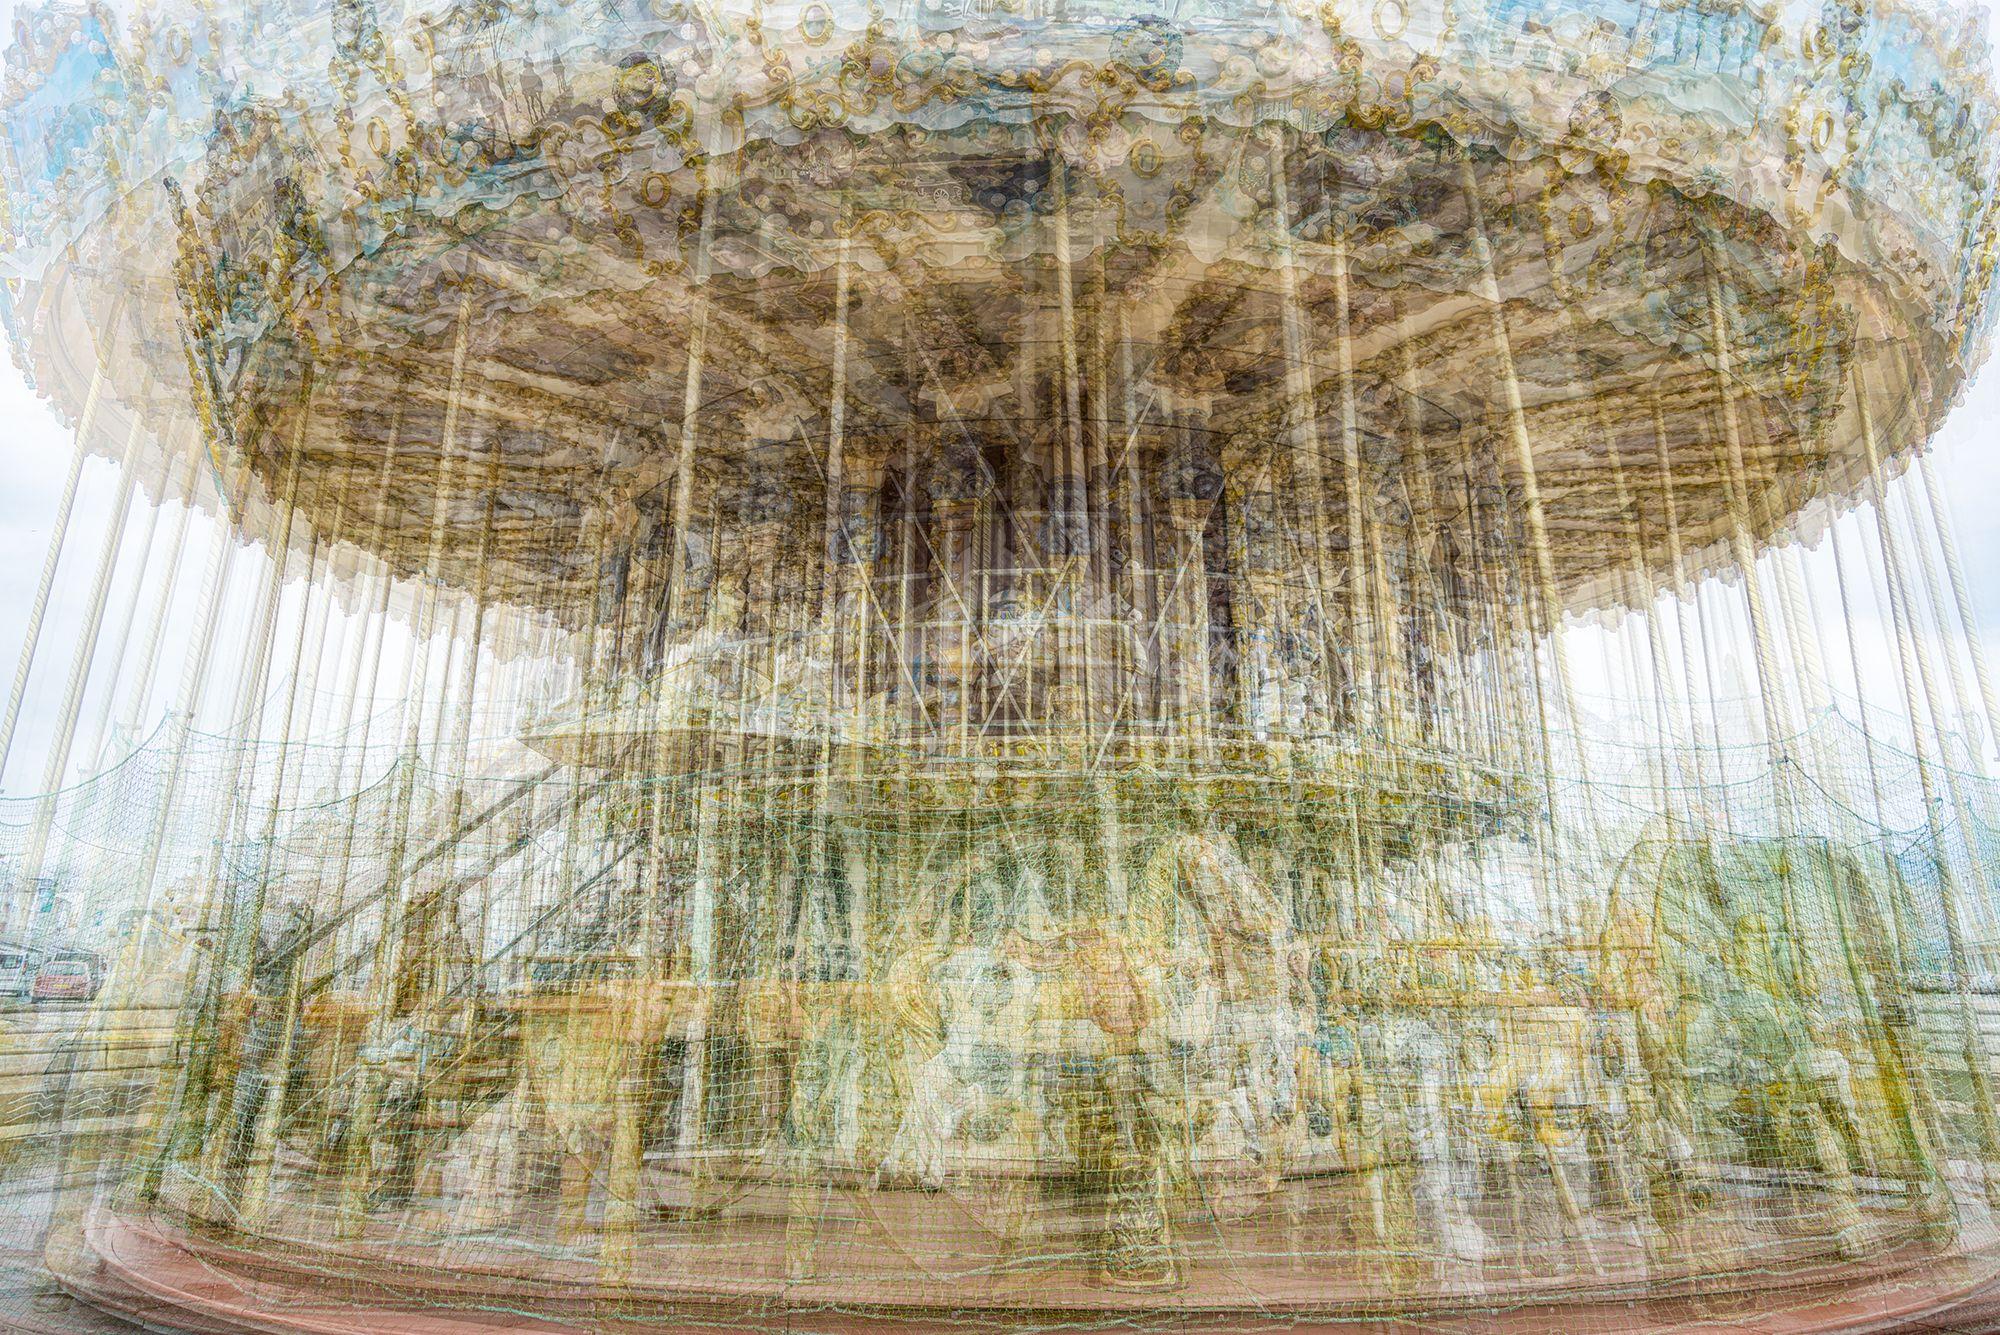 Adam Regan Color Photograph - On The Merry Go Round III, Photograph, Archival Ink Jet